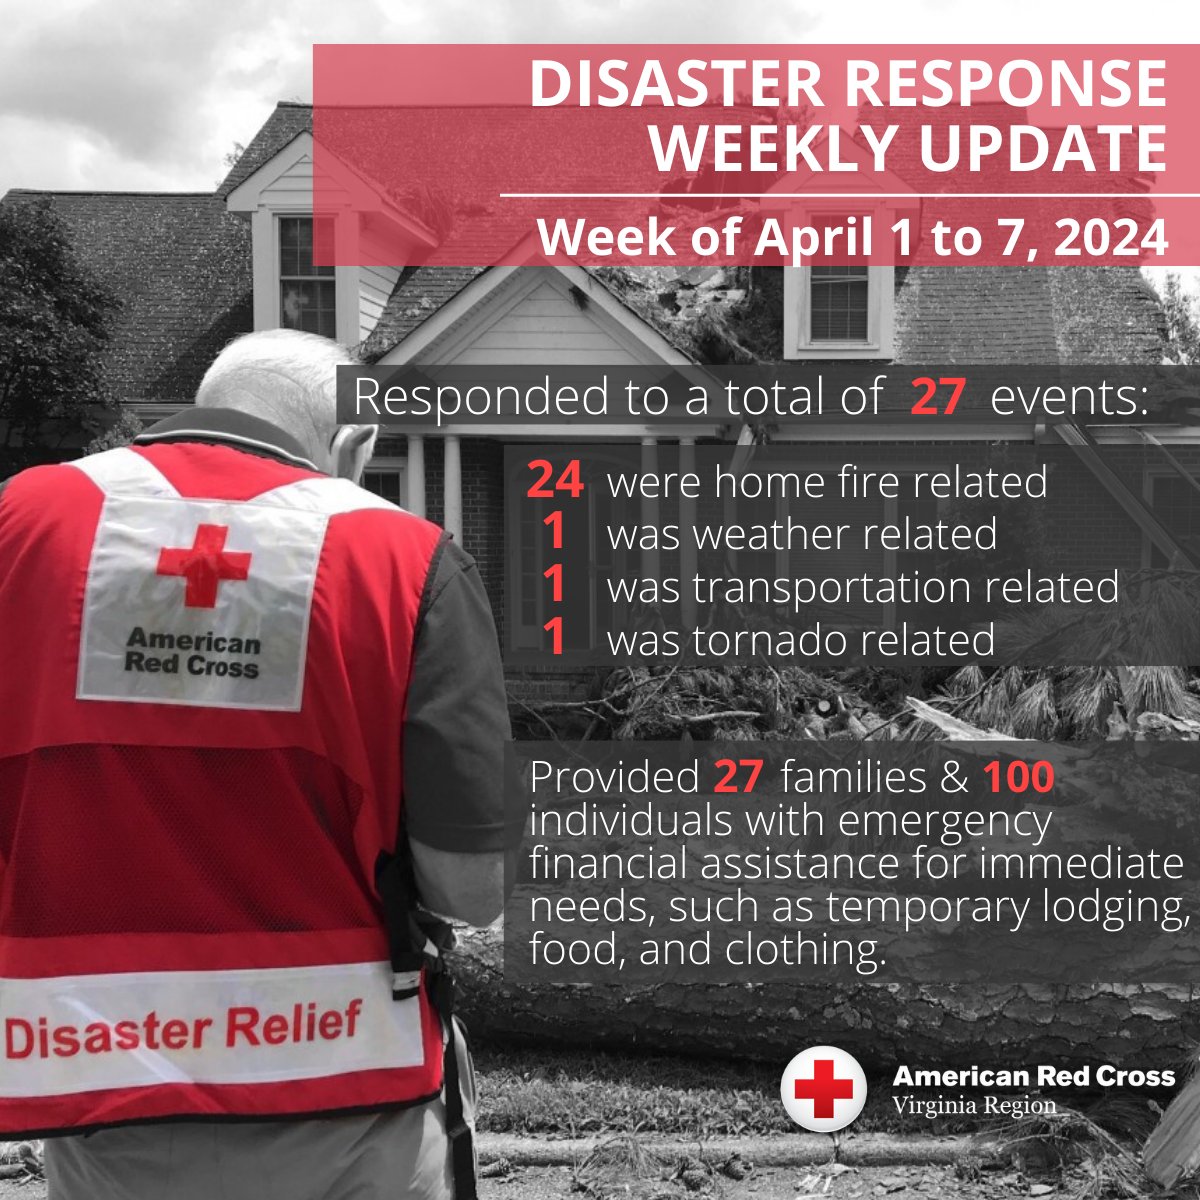 This past week, the American Red Cross Virginia Region responded to 27 disaster events, providing emergency assistance such as temporary lodging & support for food & clothing to 27 families and 100 individuals. Learn more about our service delivery at redcross.org/Virginia ⛑️